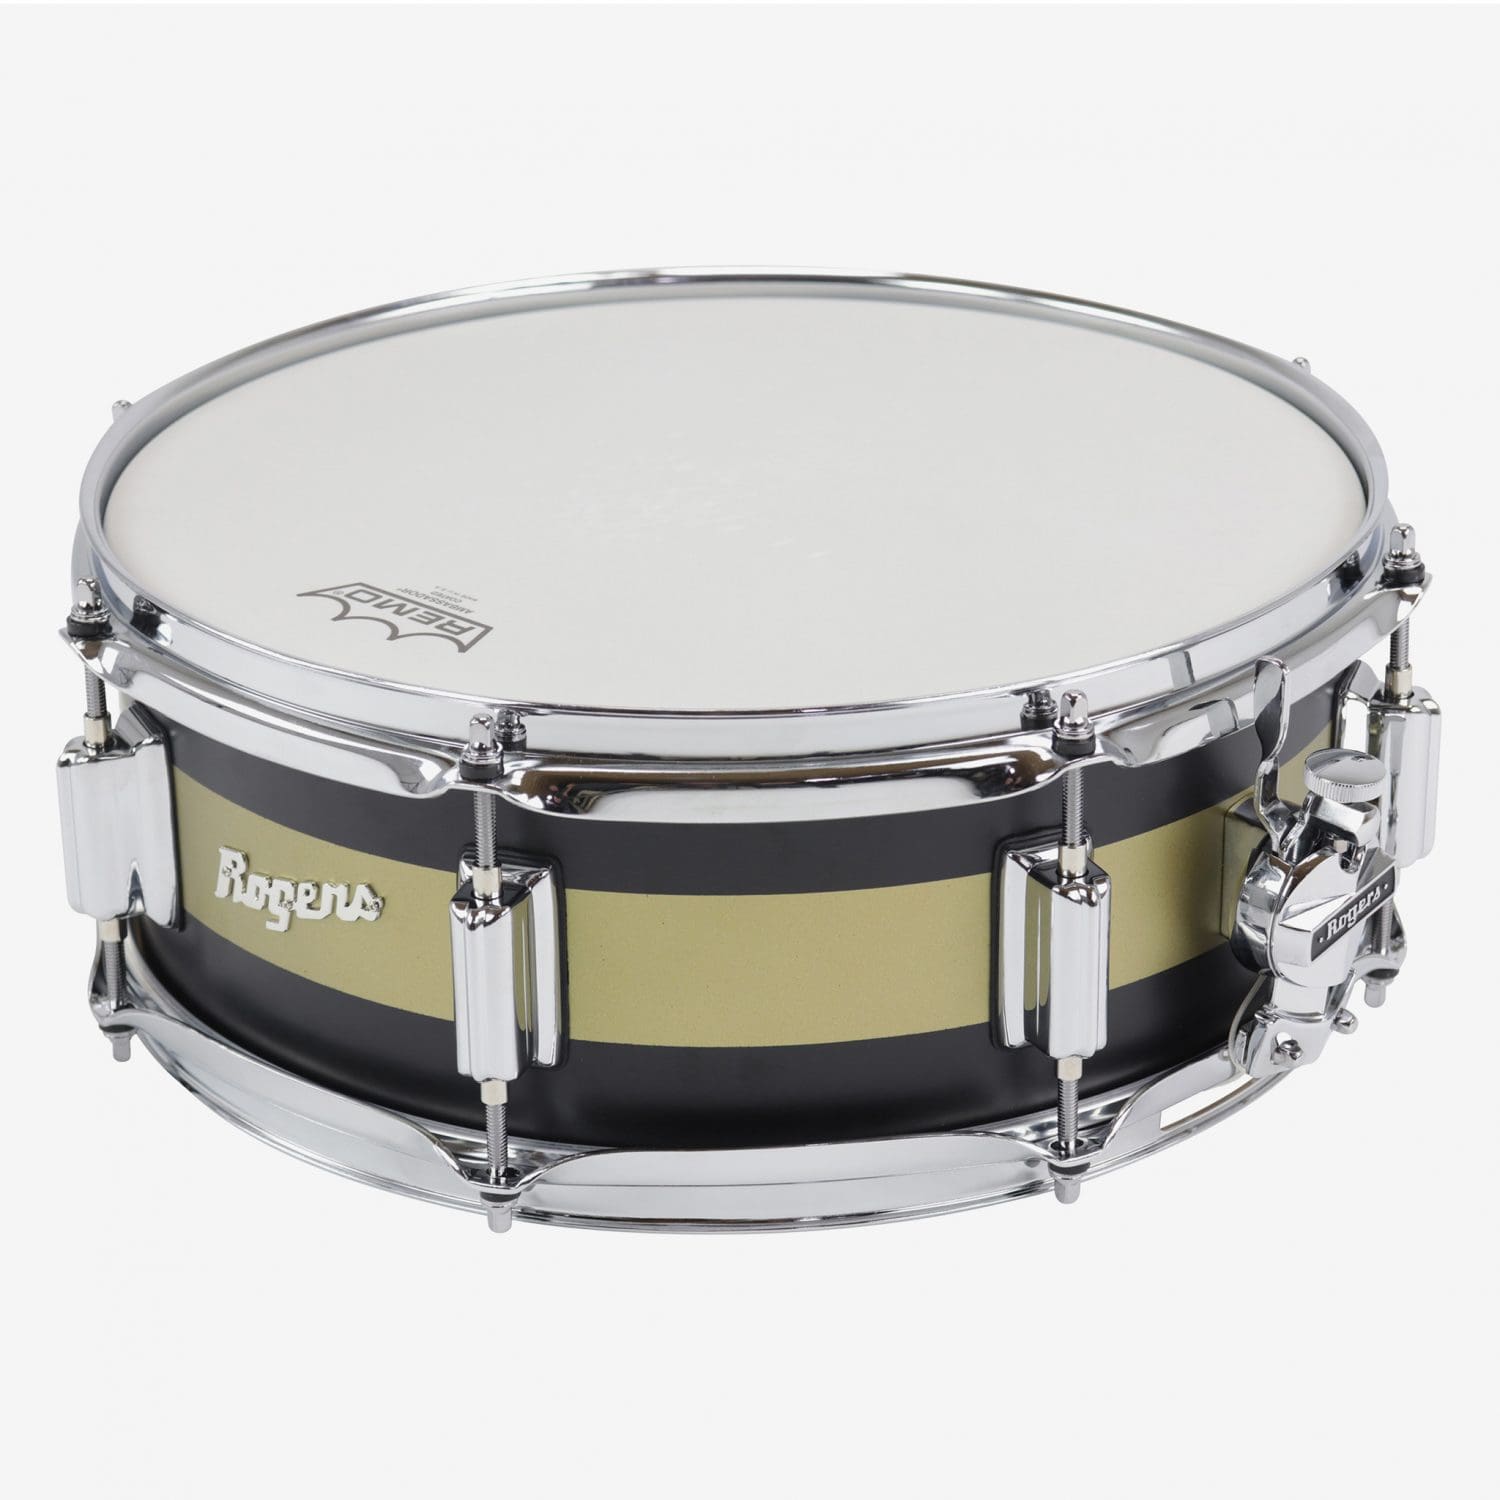 Satin Black/Gold Duco Tower Snare Drum